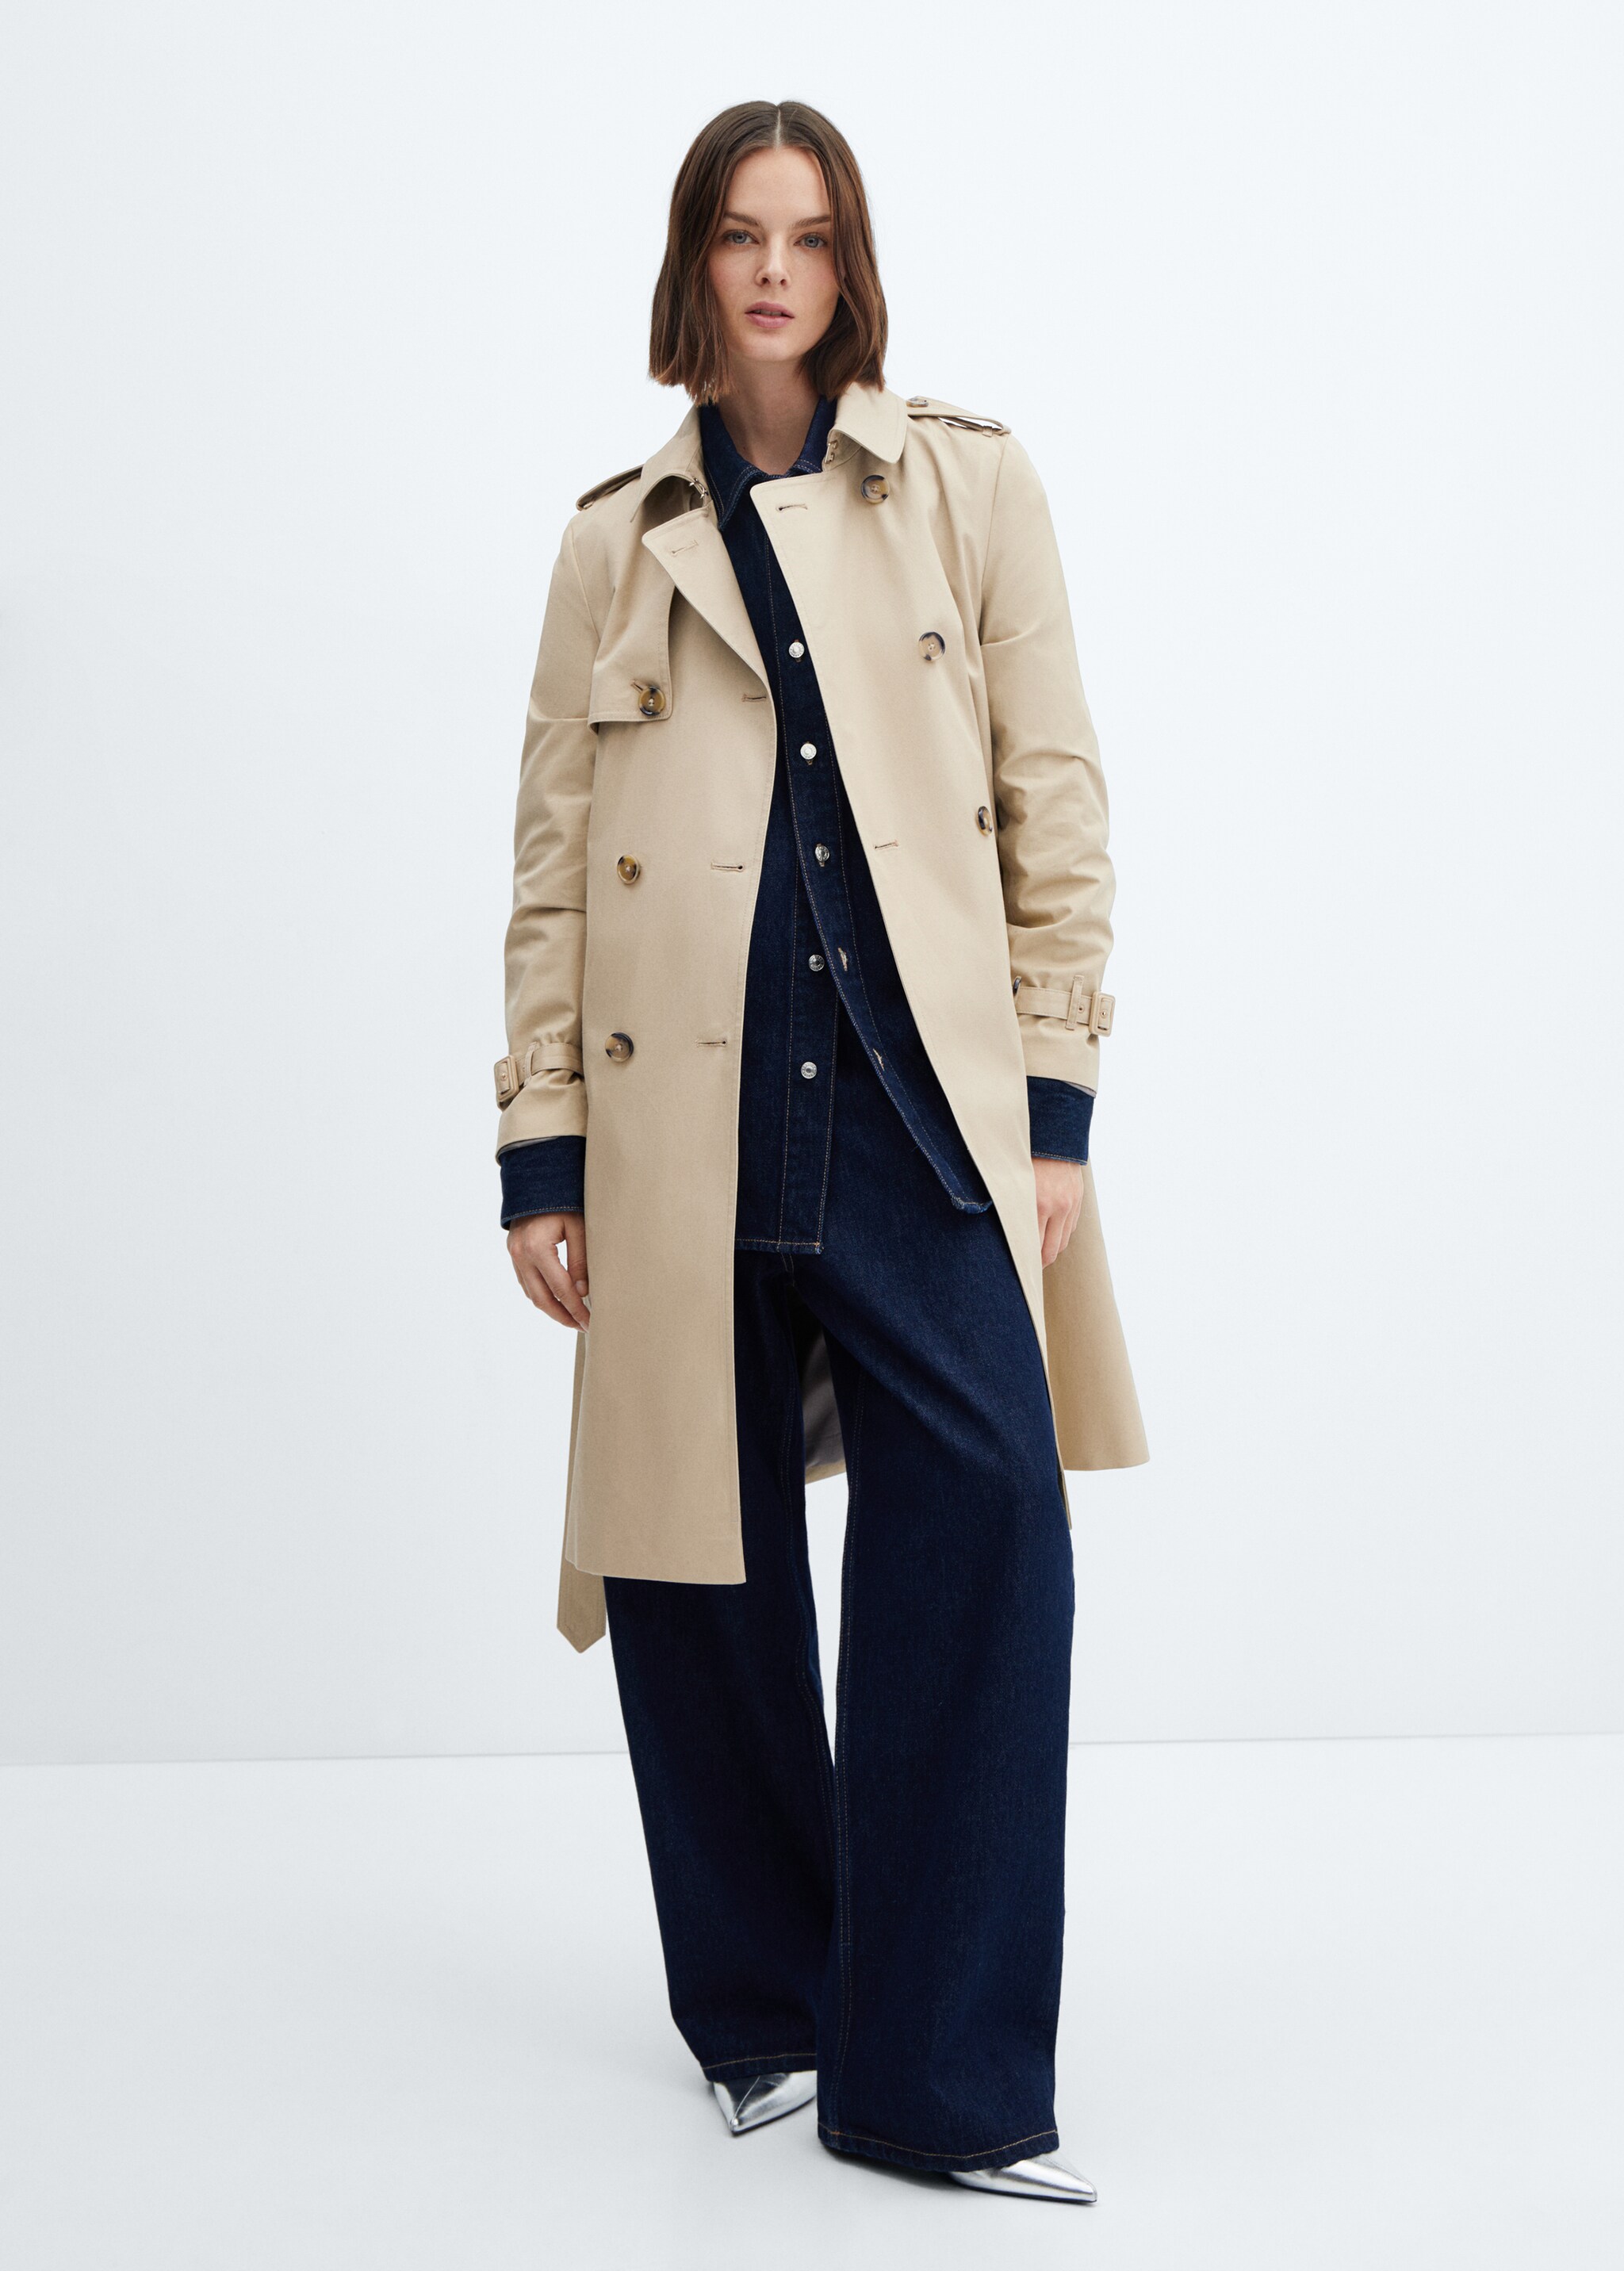 Classic trench coat with belt - General plane